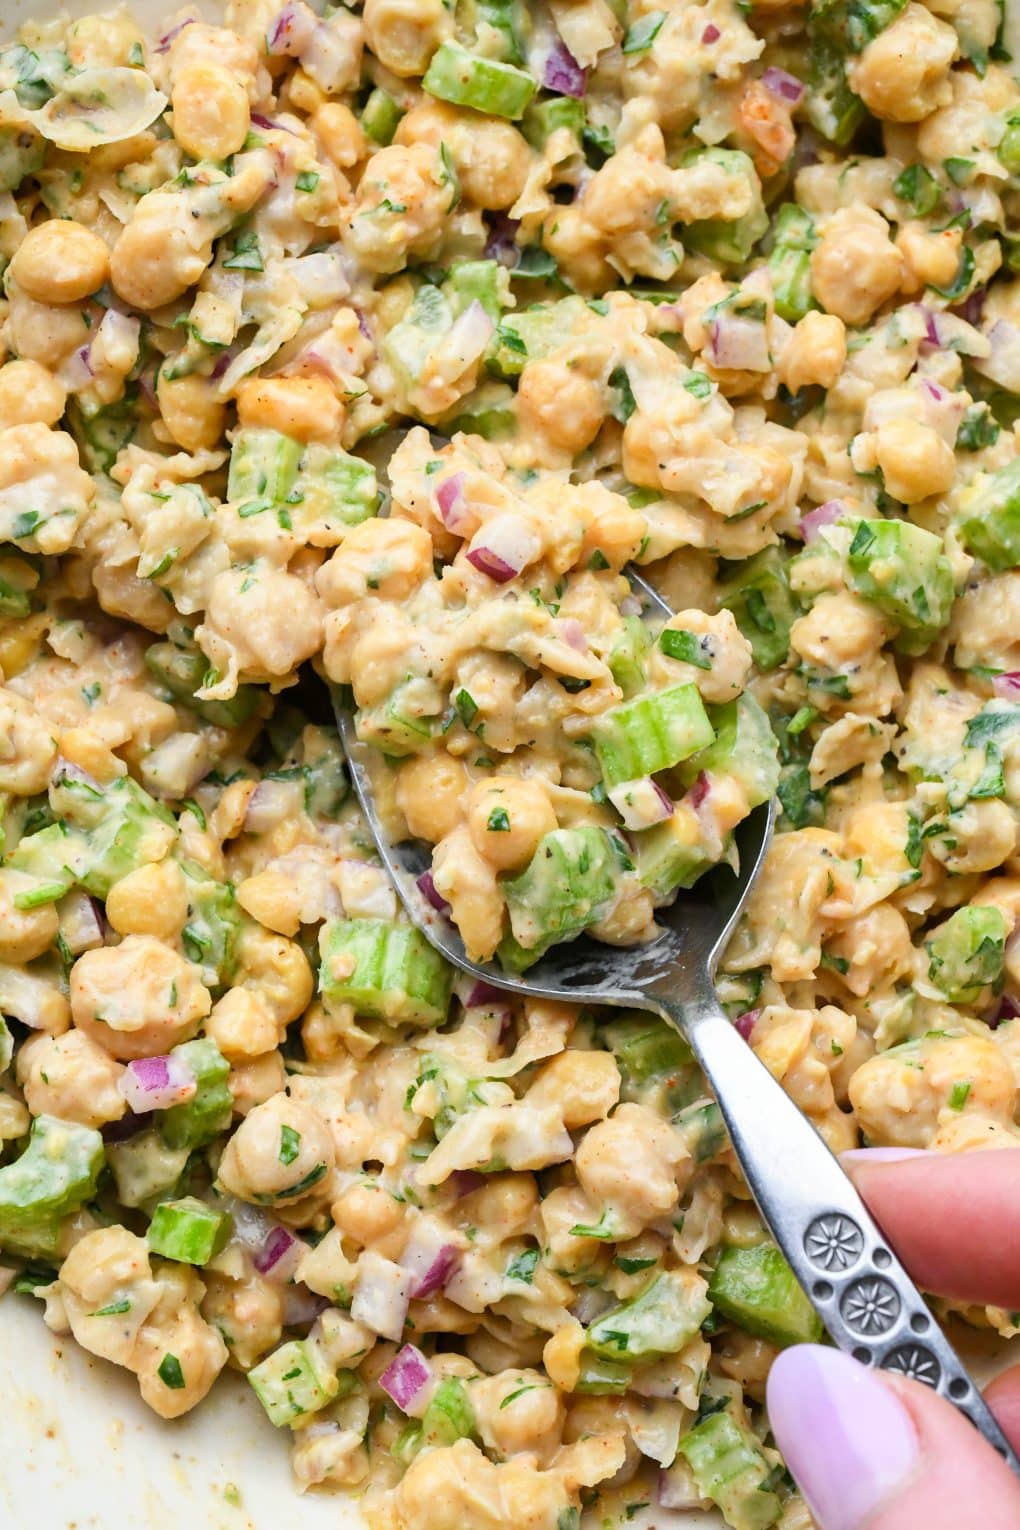 How to make smashed chickpea salad: Close up of a mixing spoon full of chickpea salad to show the creamy chunky texture.